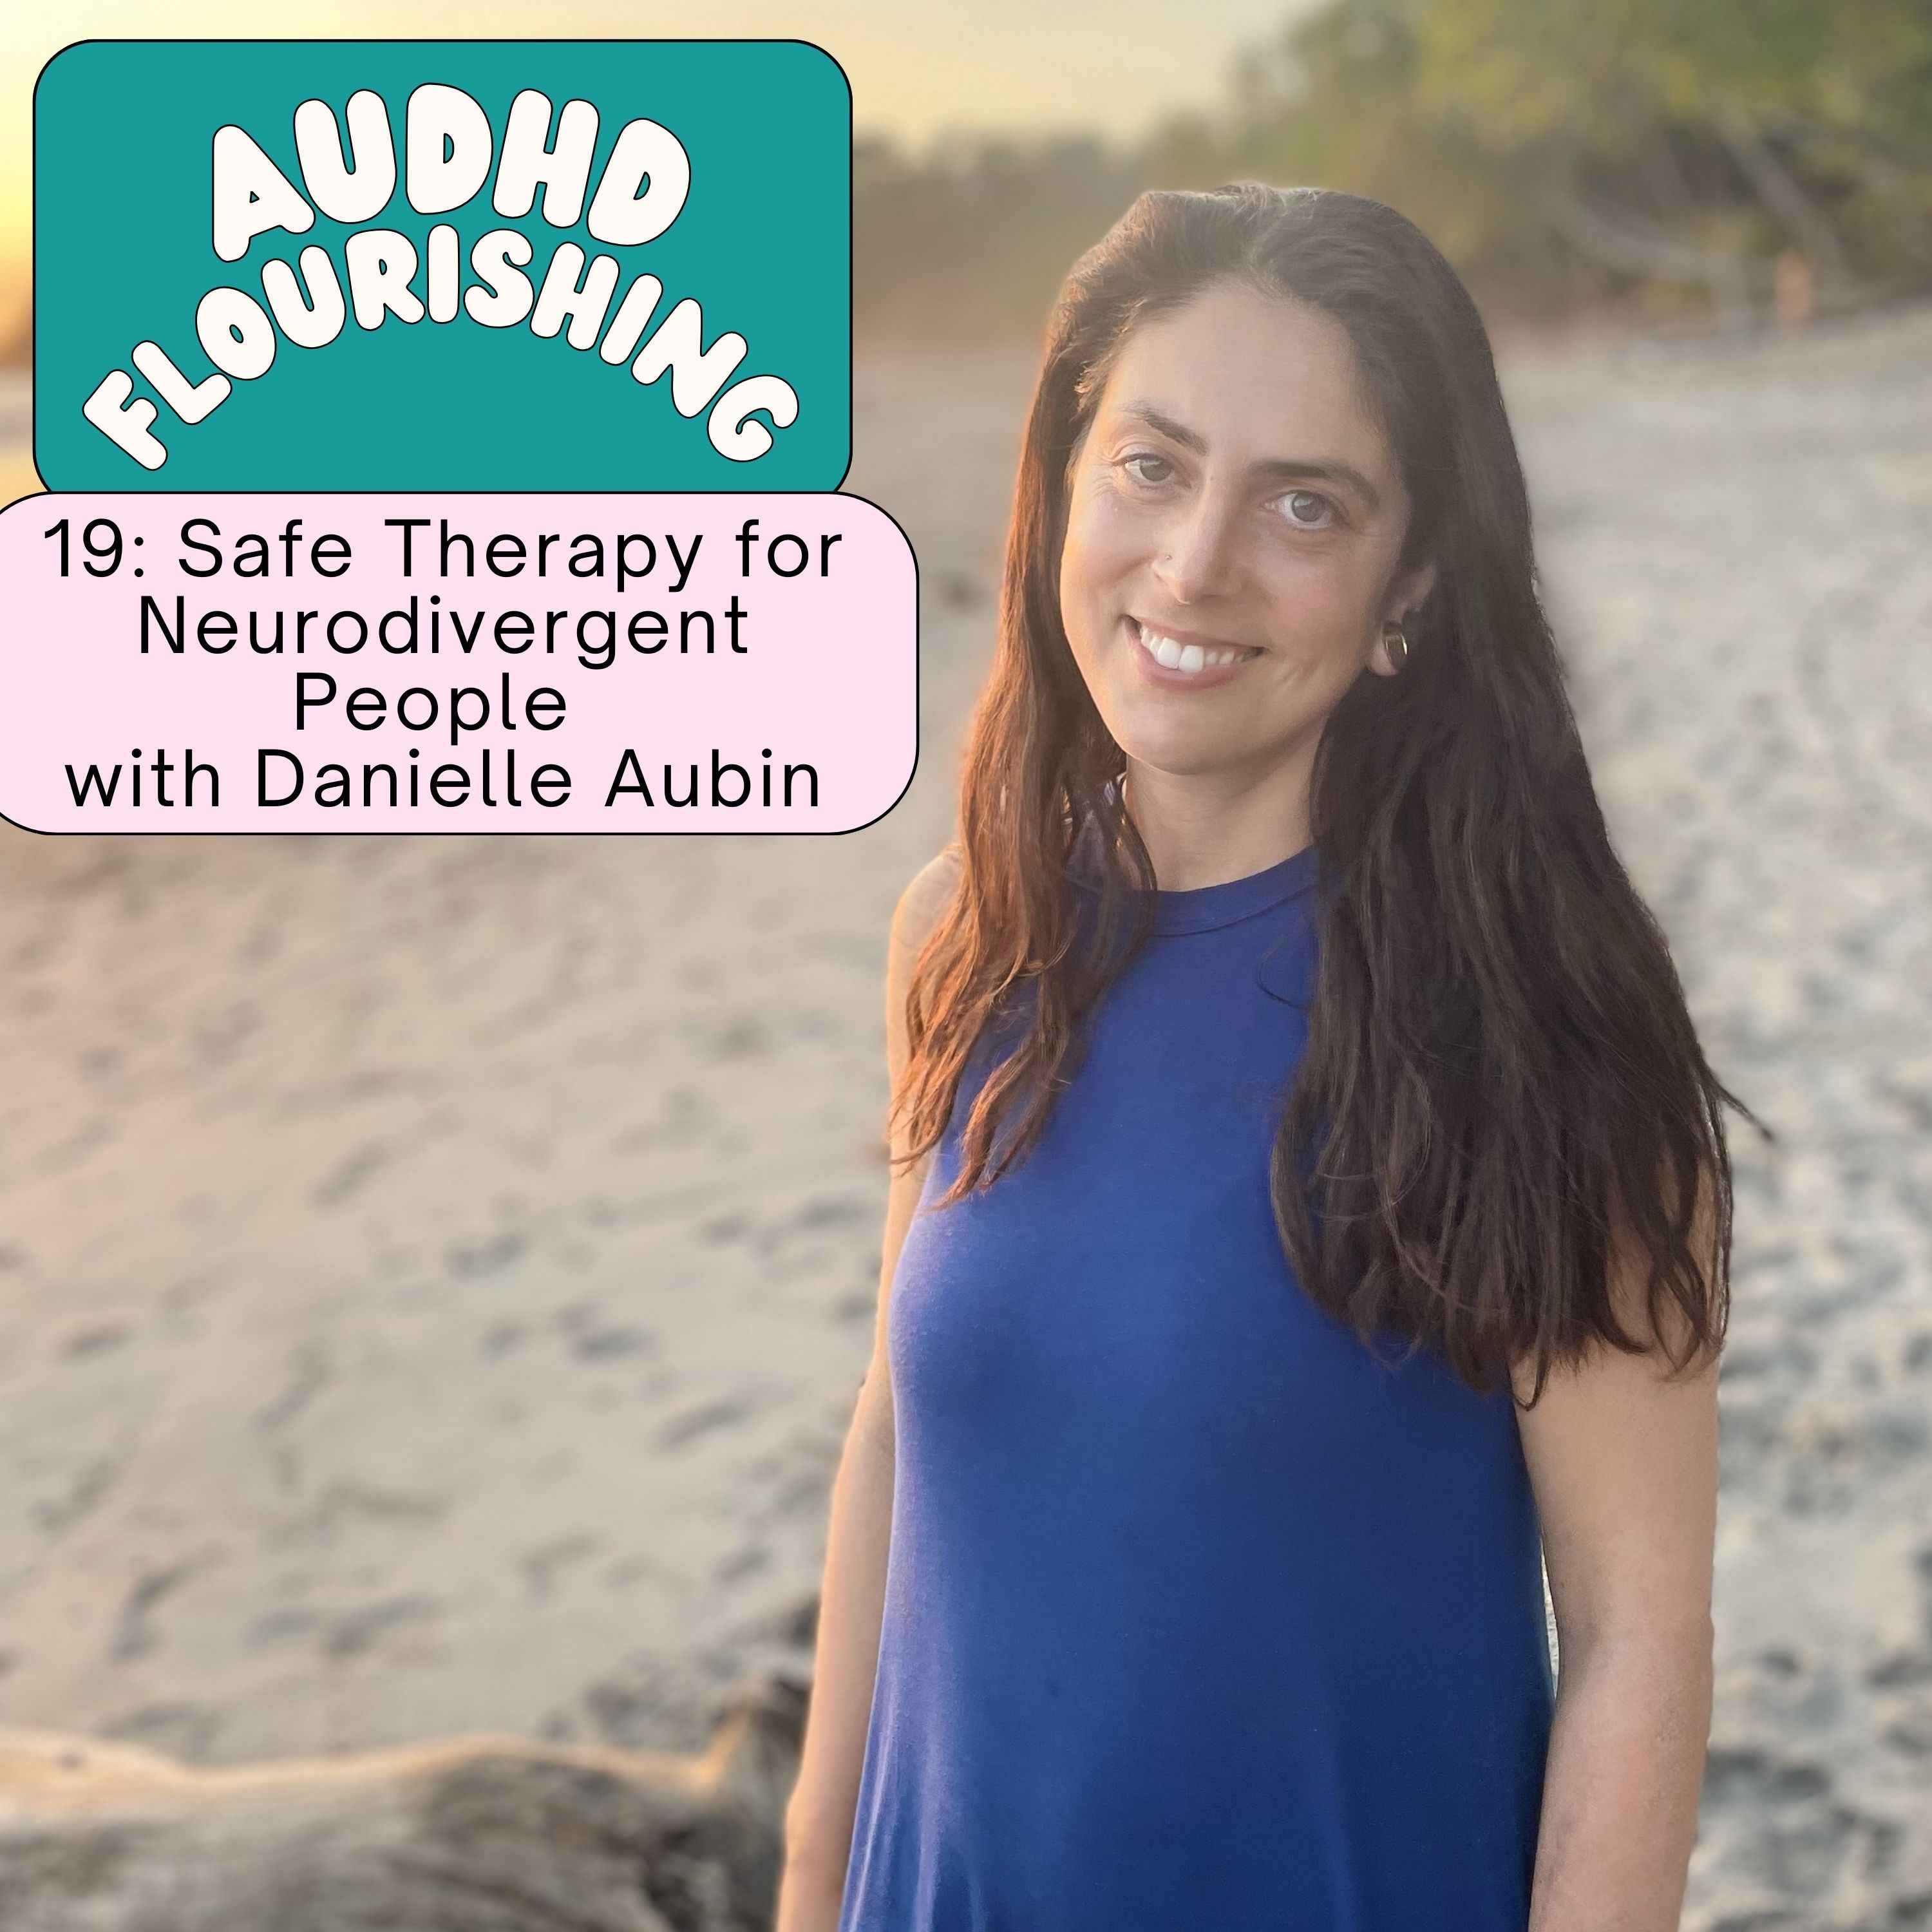 019 Safe Therapy for Neurodivergent People with Danielle Aubin